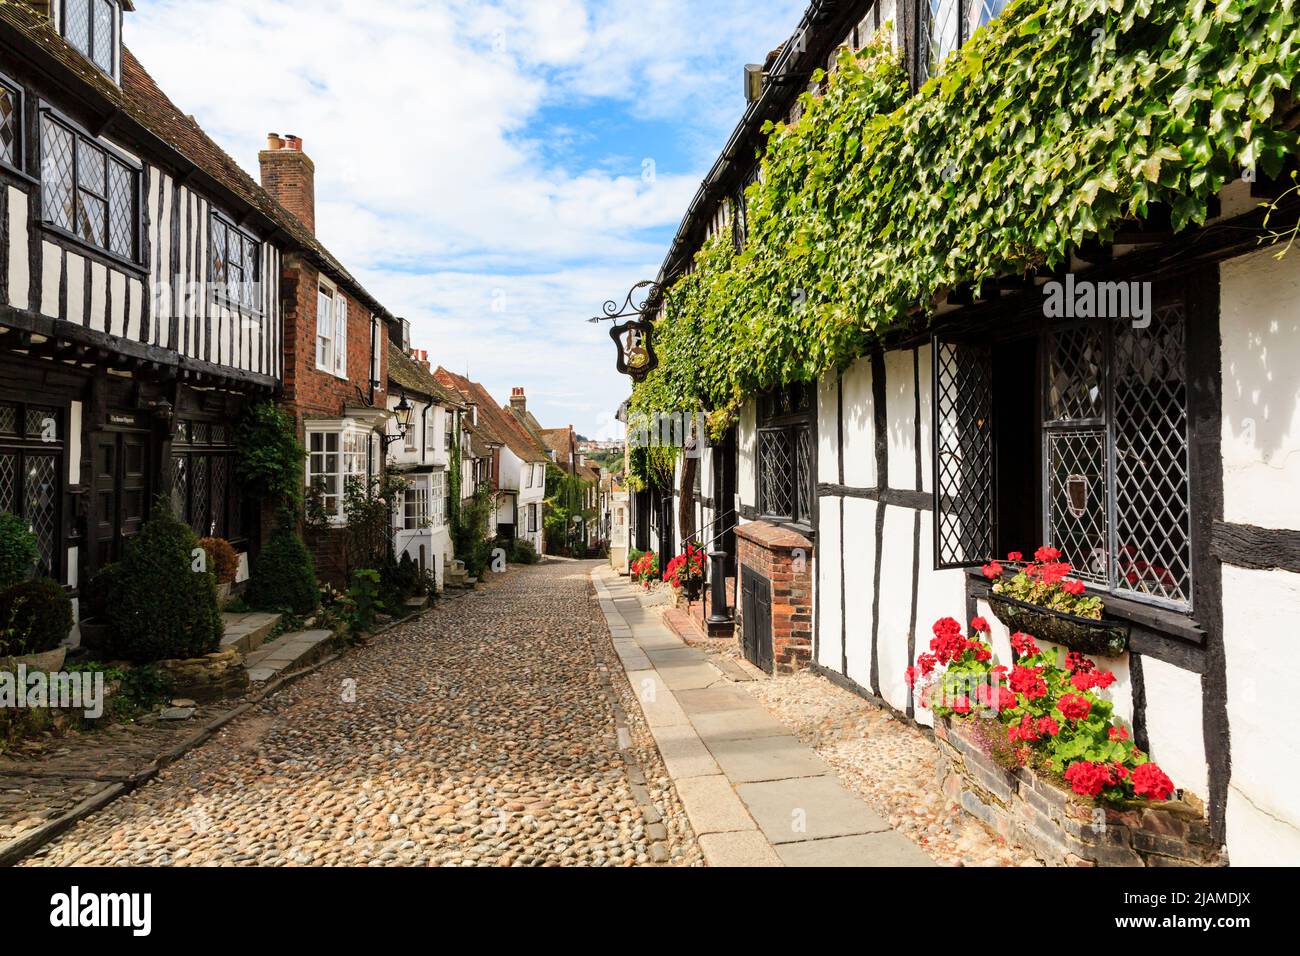 The 15th century timbered Mermaid Inn on narrow cobbled street in historic Cinque Port town. Mermaid Street, Rye, East Sussex, England, UK, Britain Stock Photo